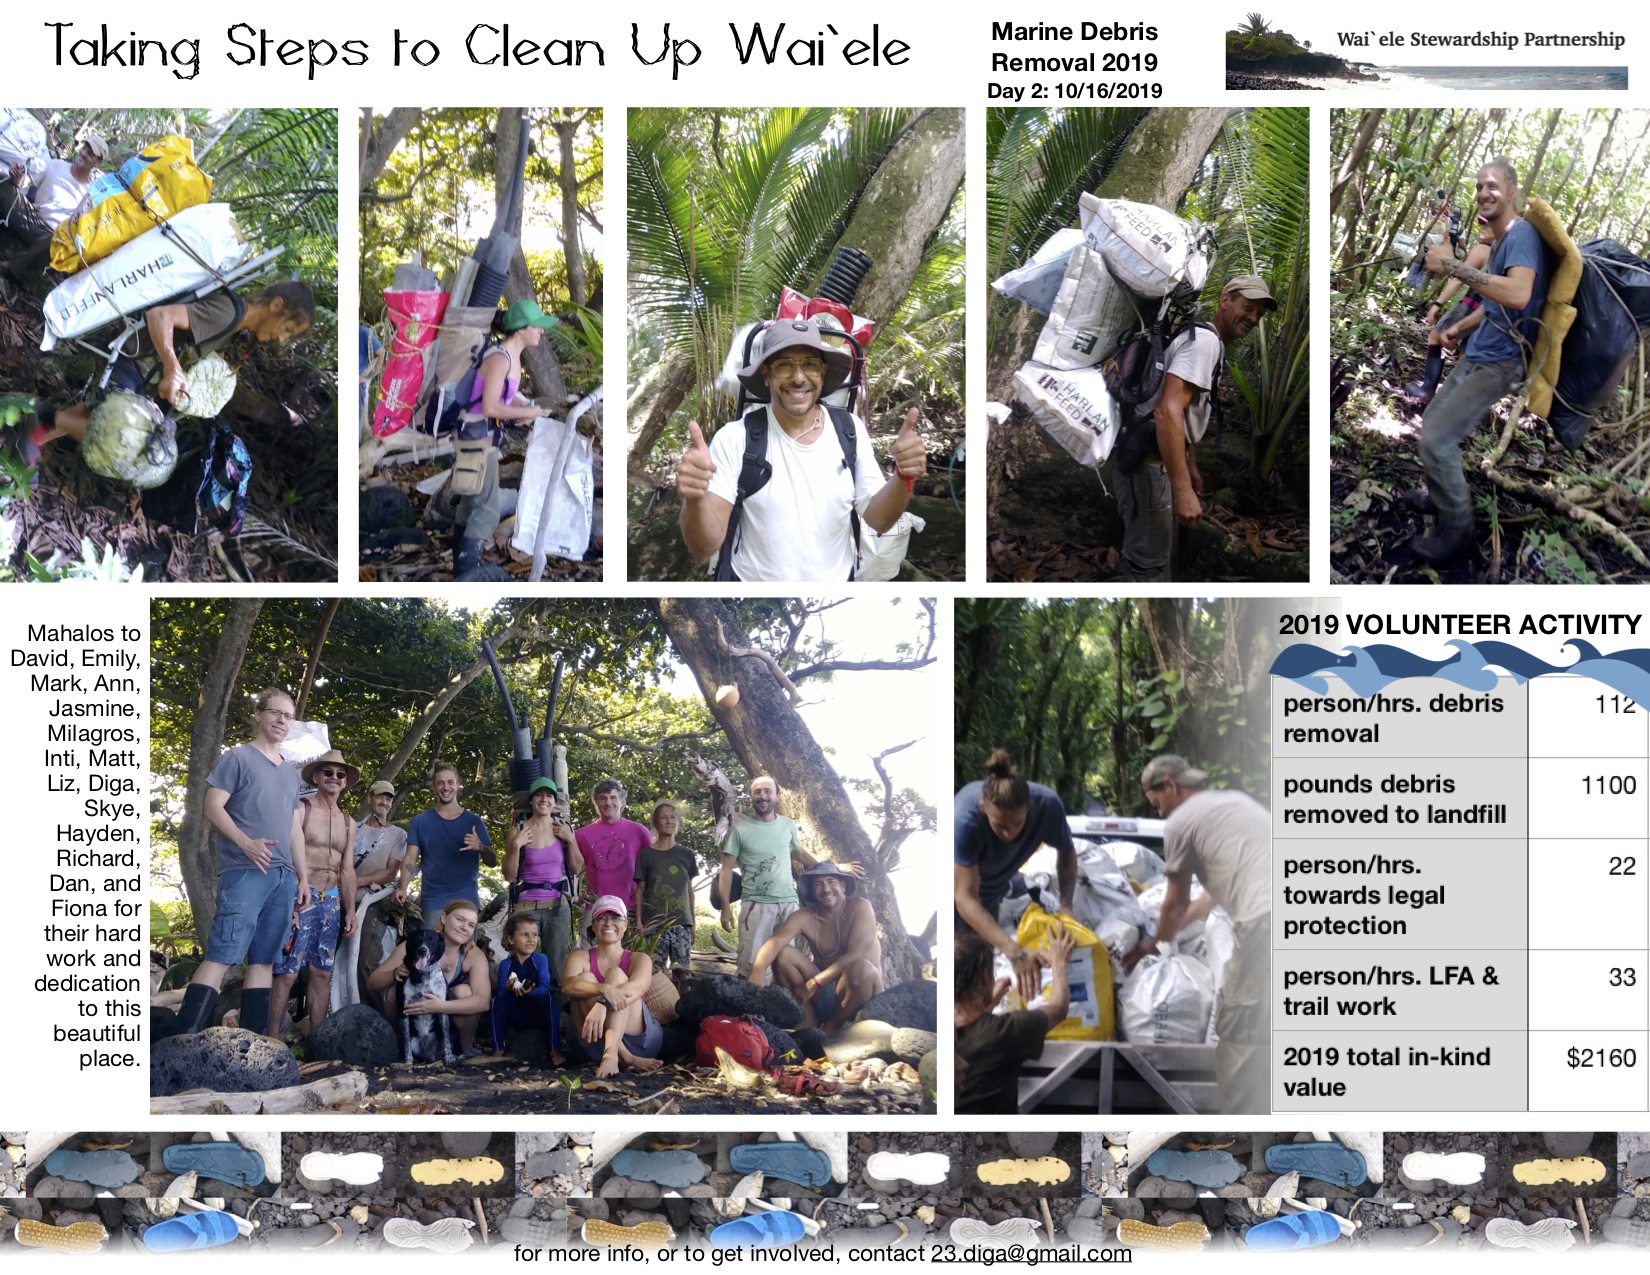 Image collage of cleanup activities, list of participants, and tally of volunteer hours